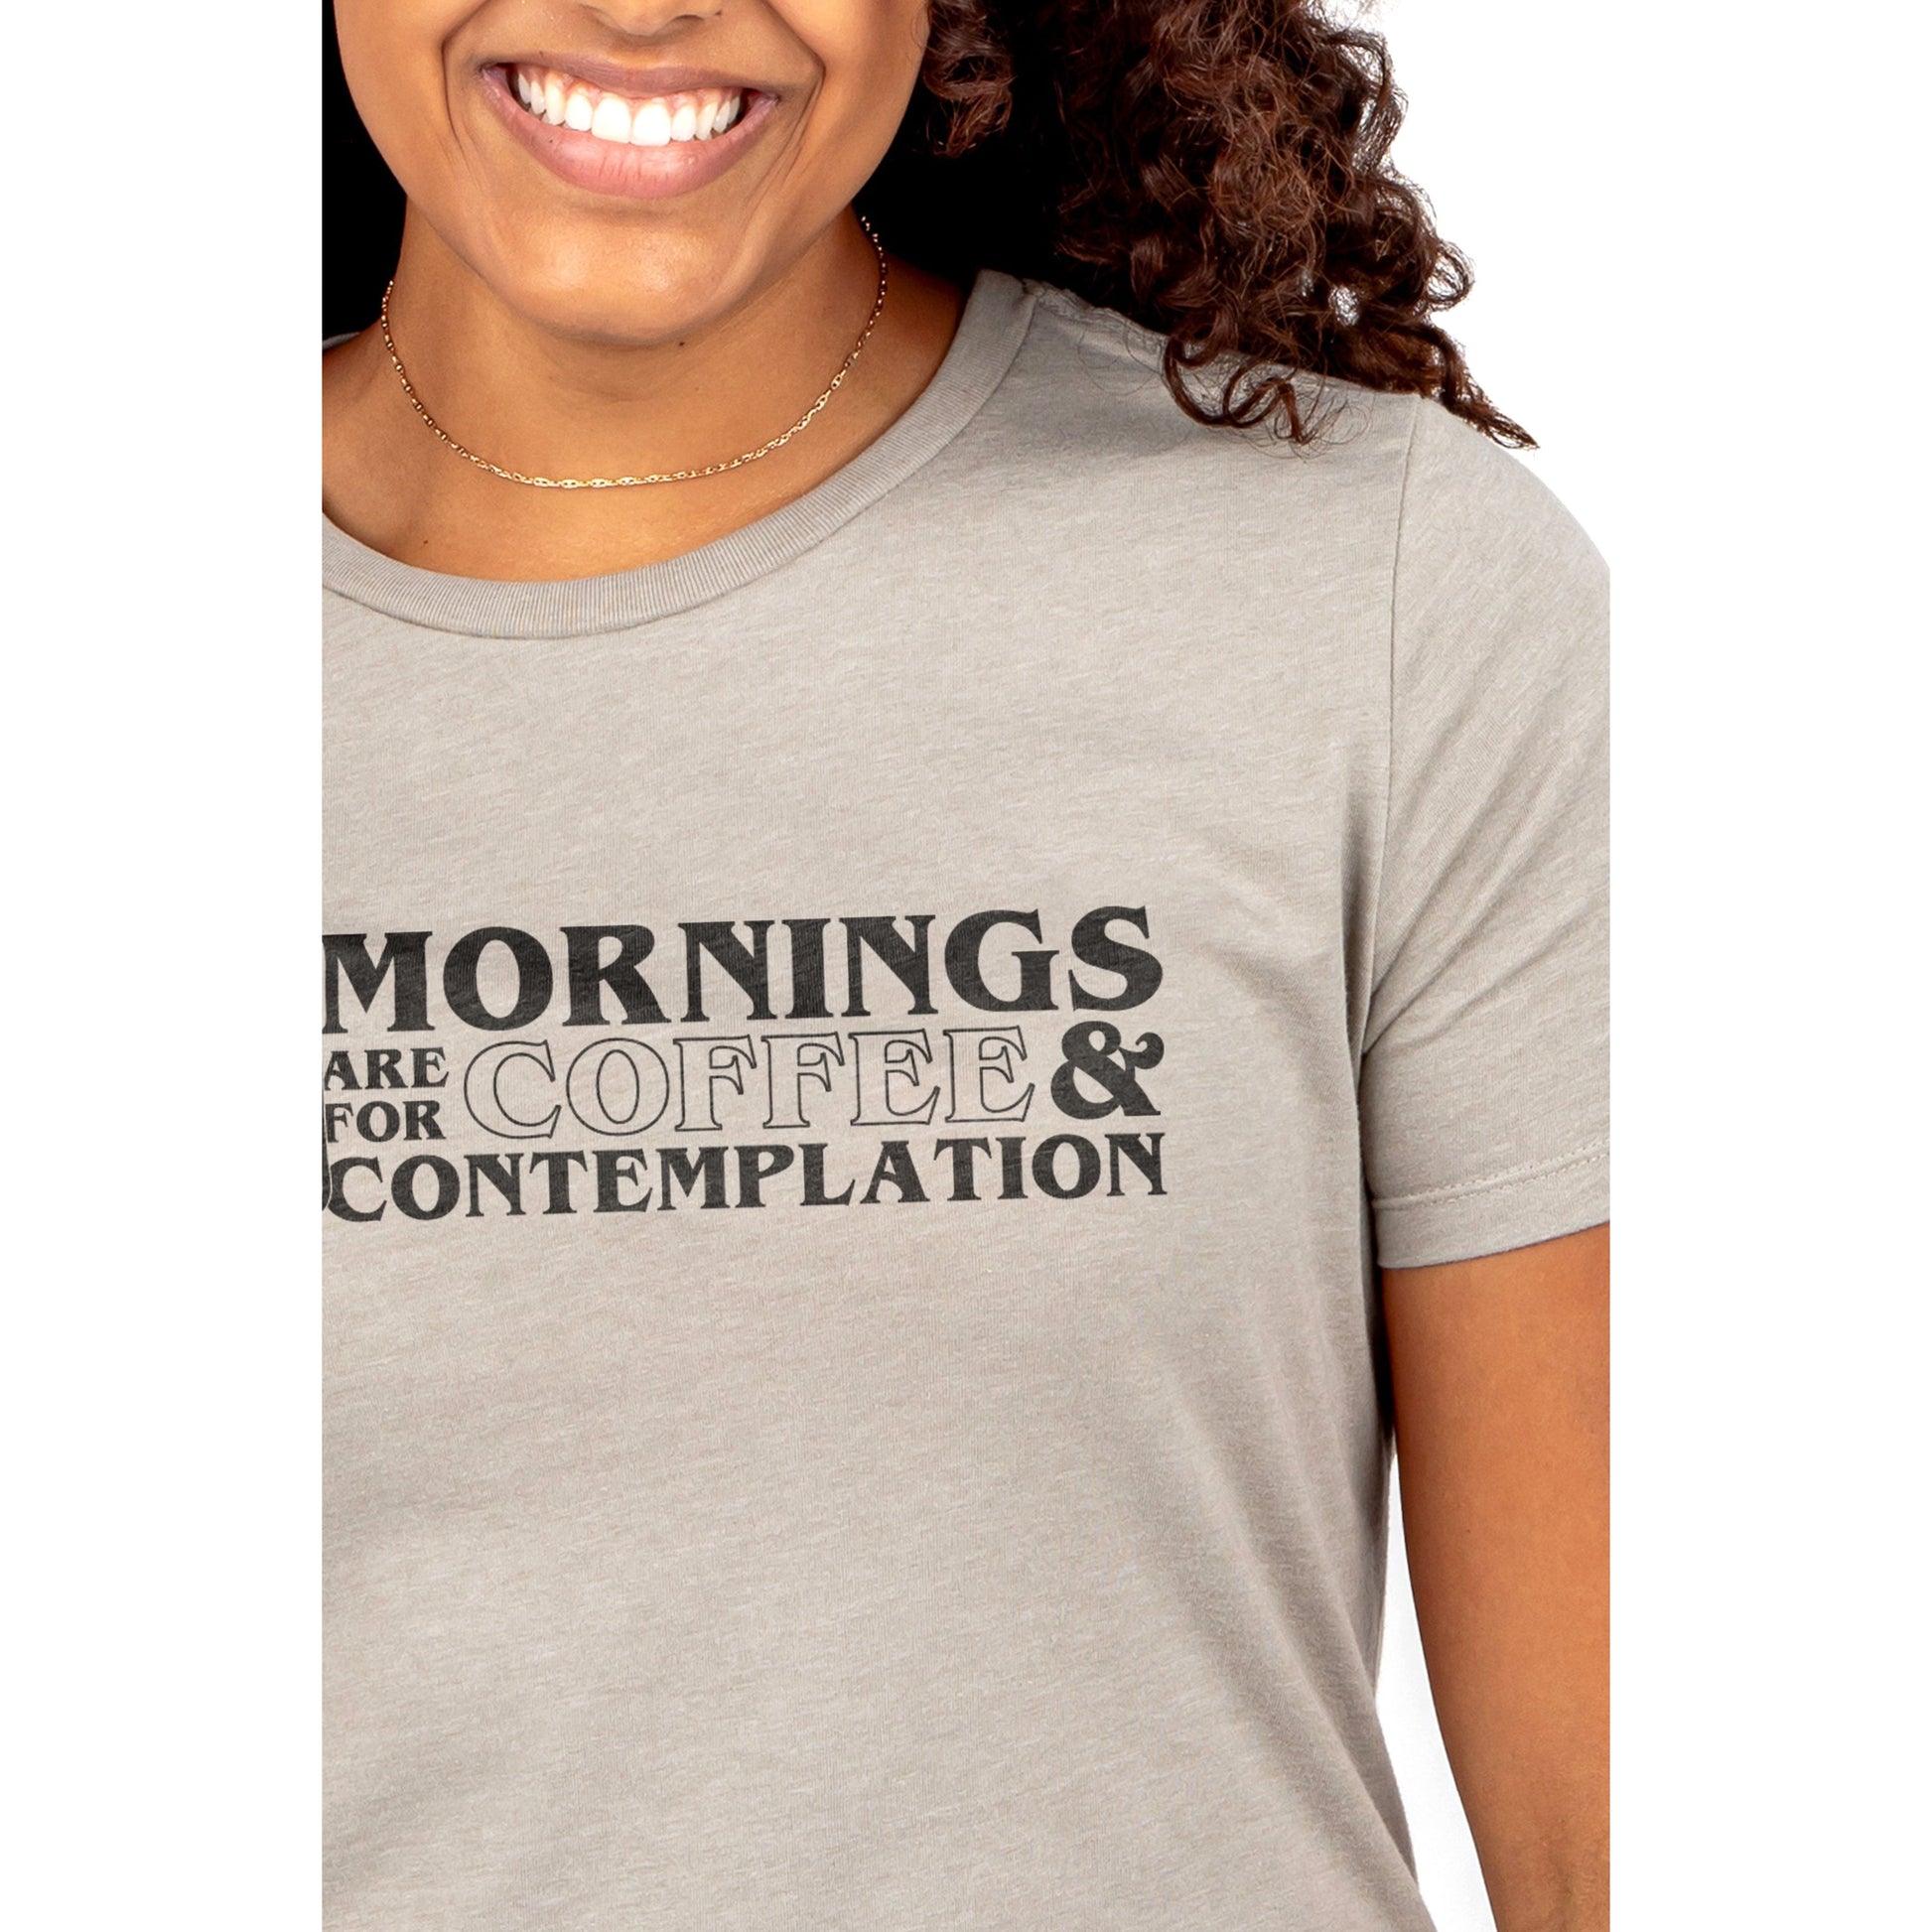 Mornings Are For Coffee And Contemplation - thread tank | Stories you can wear.